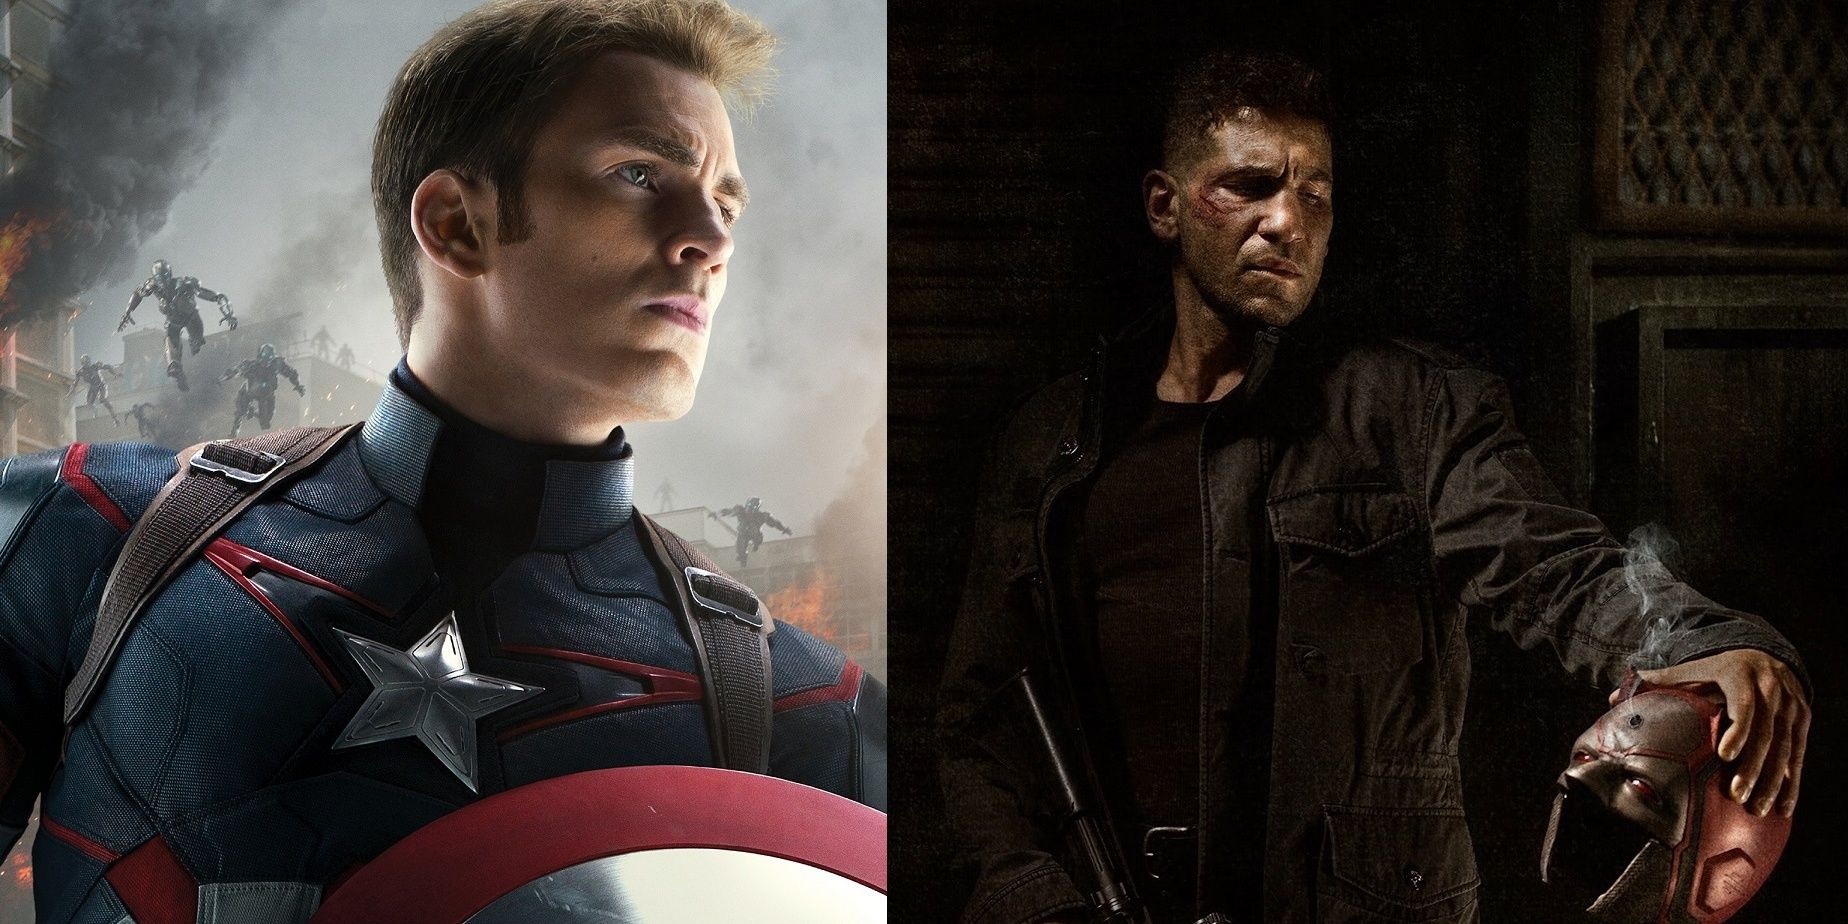 Captain America and The Punisher